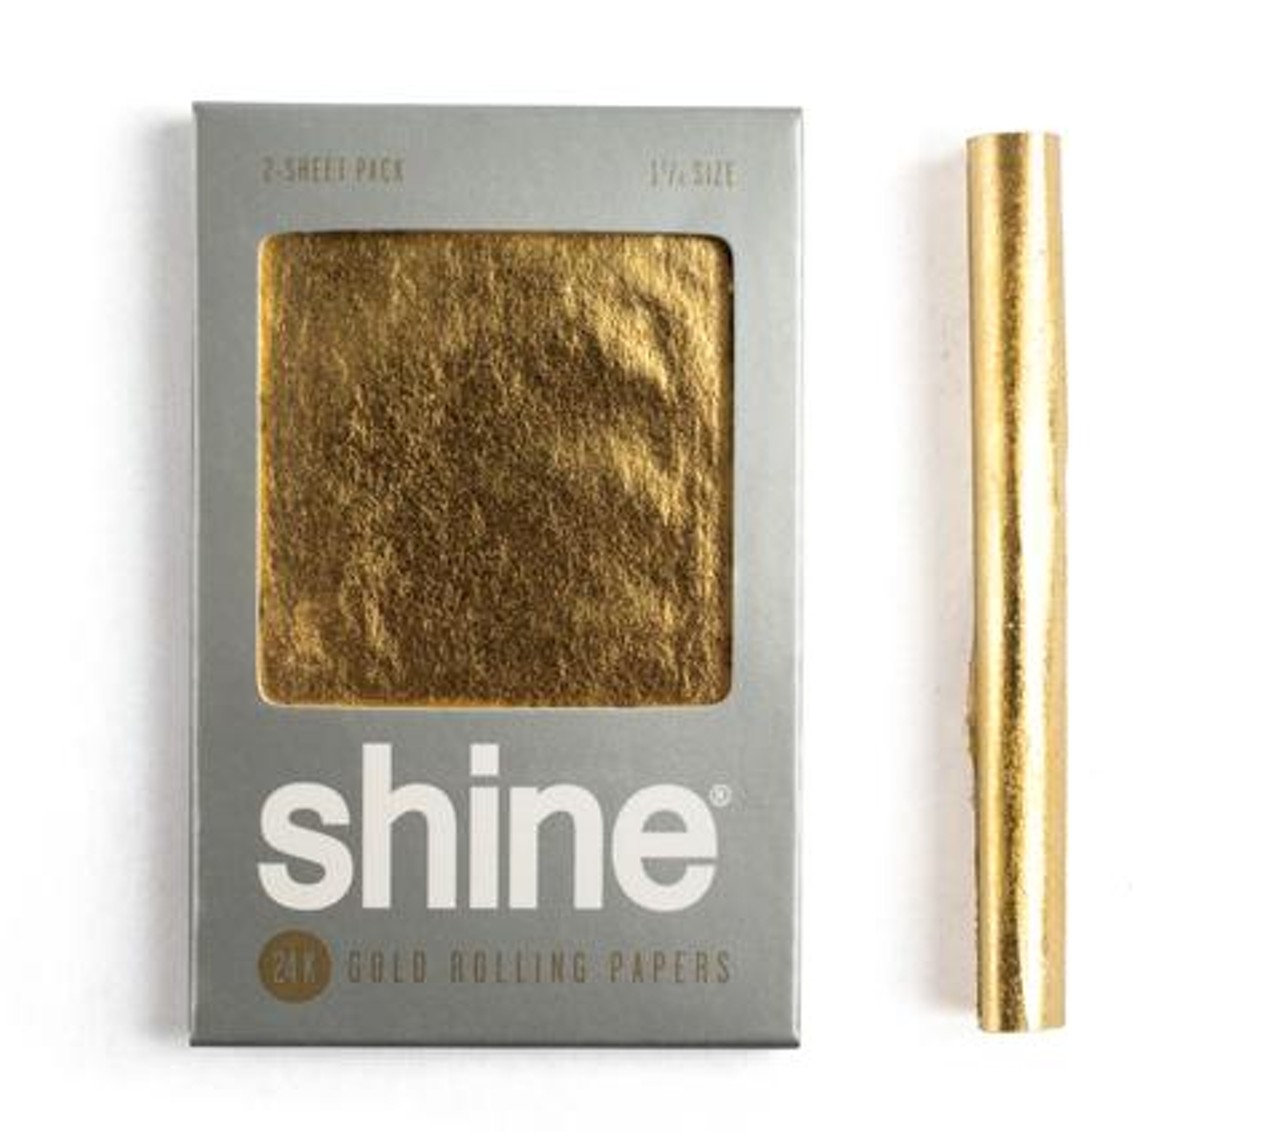 Shine 24k rolling paper, 12-sheet pack
Tha Head Shop Smoke Shop
737 E. Nine Mile Rd., Ferndale; 248-677-0178;thaheadshop.com
For the high roller and/or Instagram influencer: So, maybe you were duped into throwing down for a VIP ticket to the doomed Fyre Festival and you&#146;re feeling like a fool. Don&#146;t worry, you can still flash your stash with Shine&#146;s 24k rolling papers. Each pack comes with a certificate of authenticity. (Which is better than a Fyre Fest cheese sandwich  &#151; ouch.) 
Photo from Tha Head Shop Smoke Shop website.